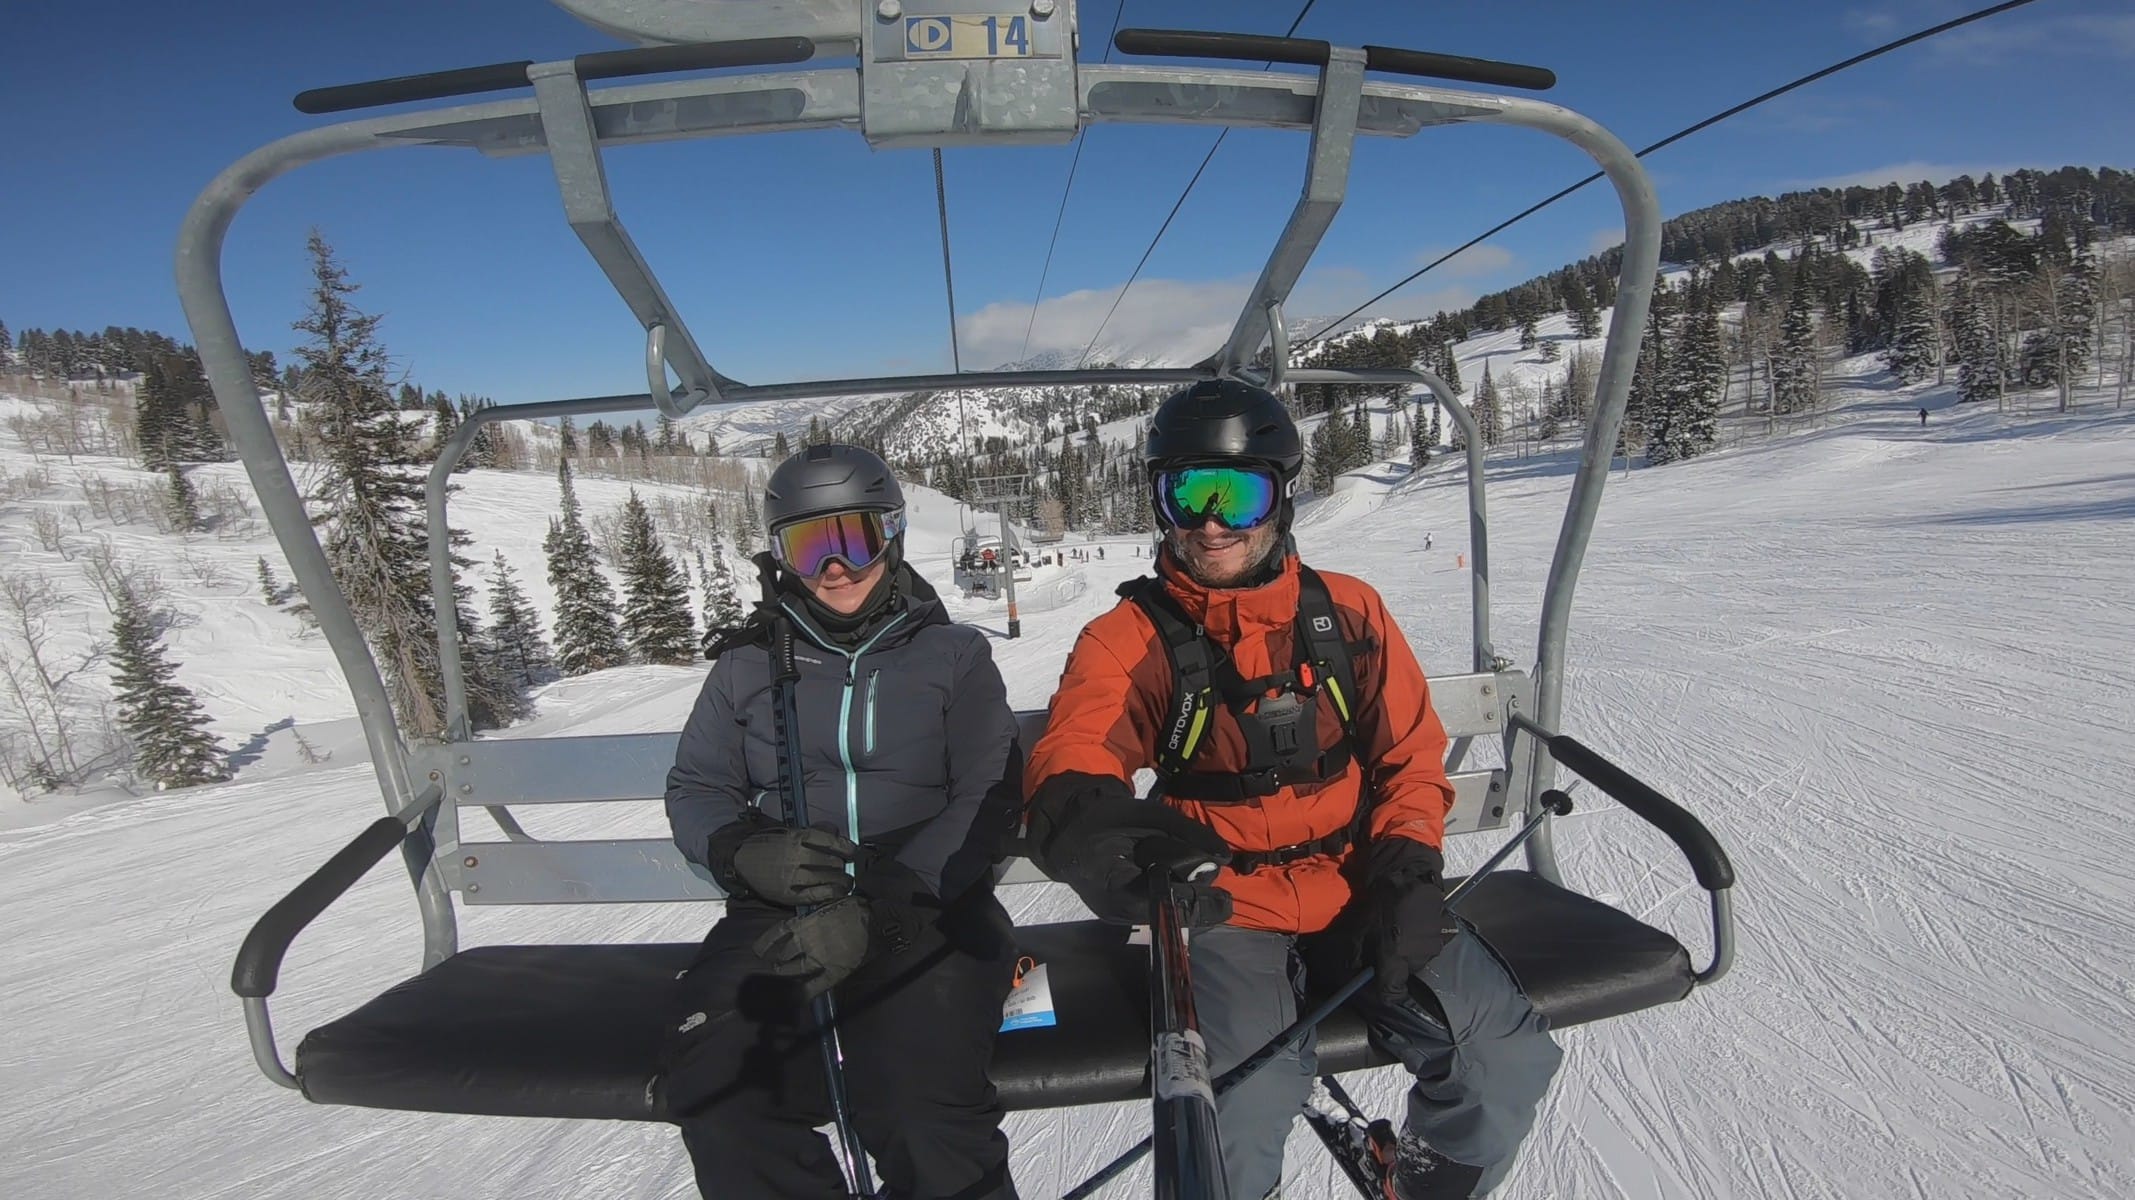 Lindsey and Keith riding the chairlift at Powder Mountain Ski Resort